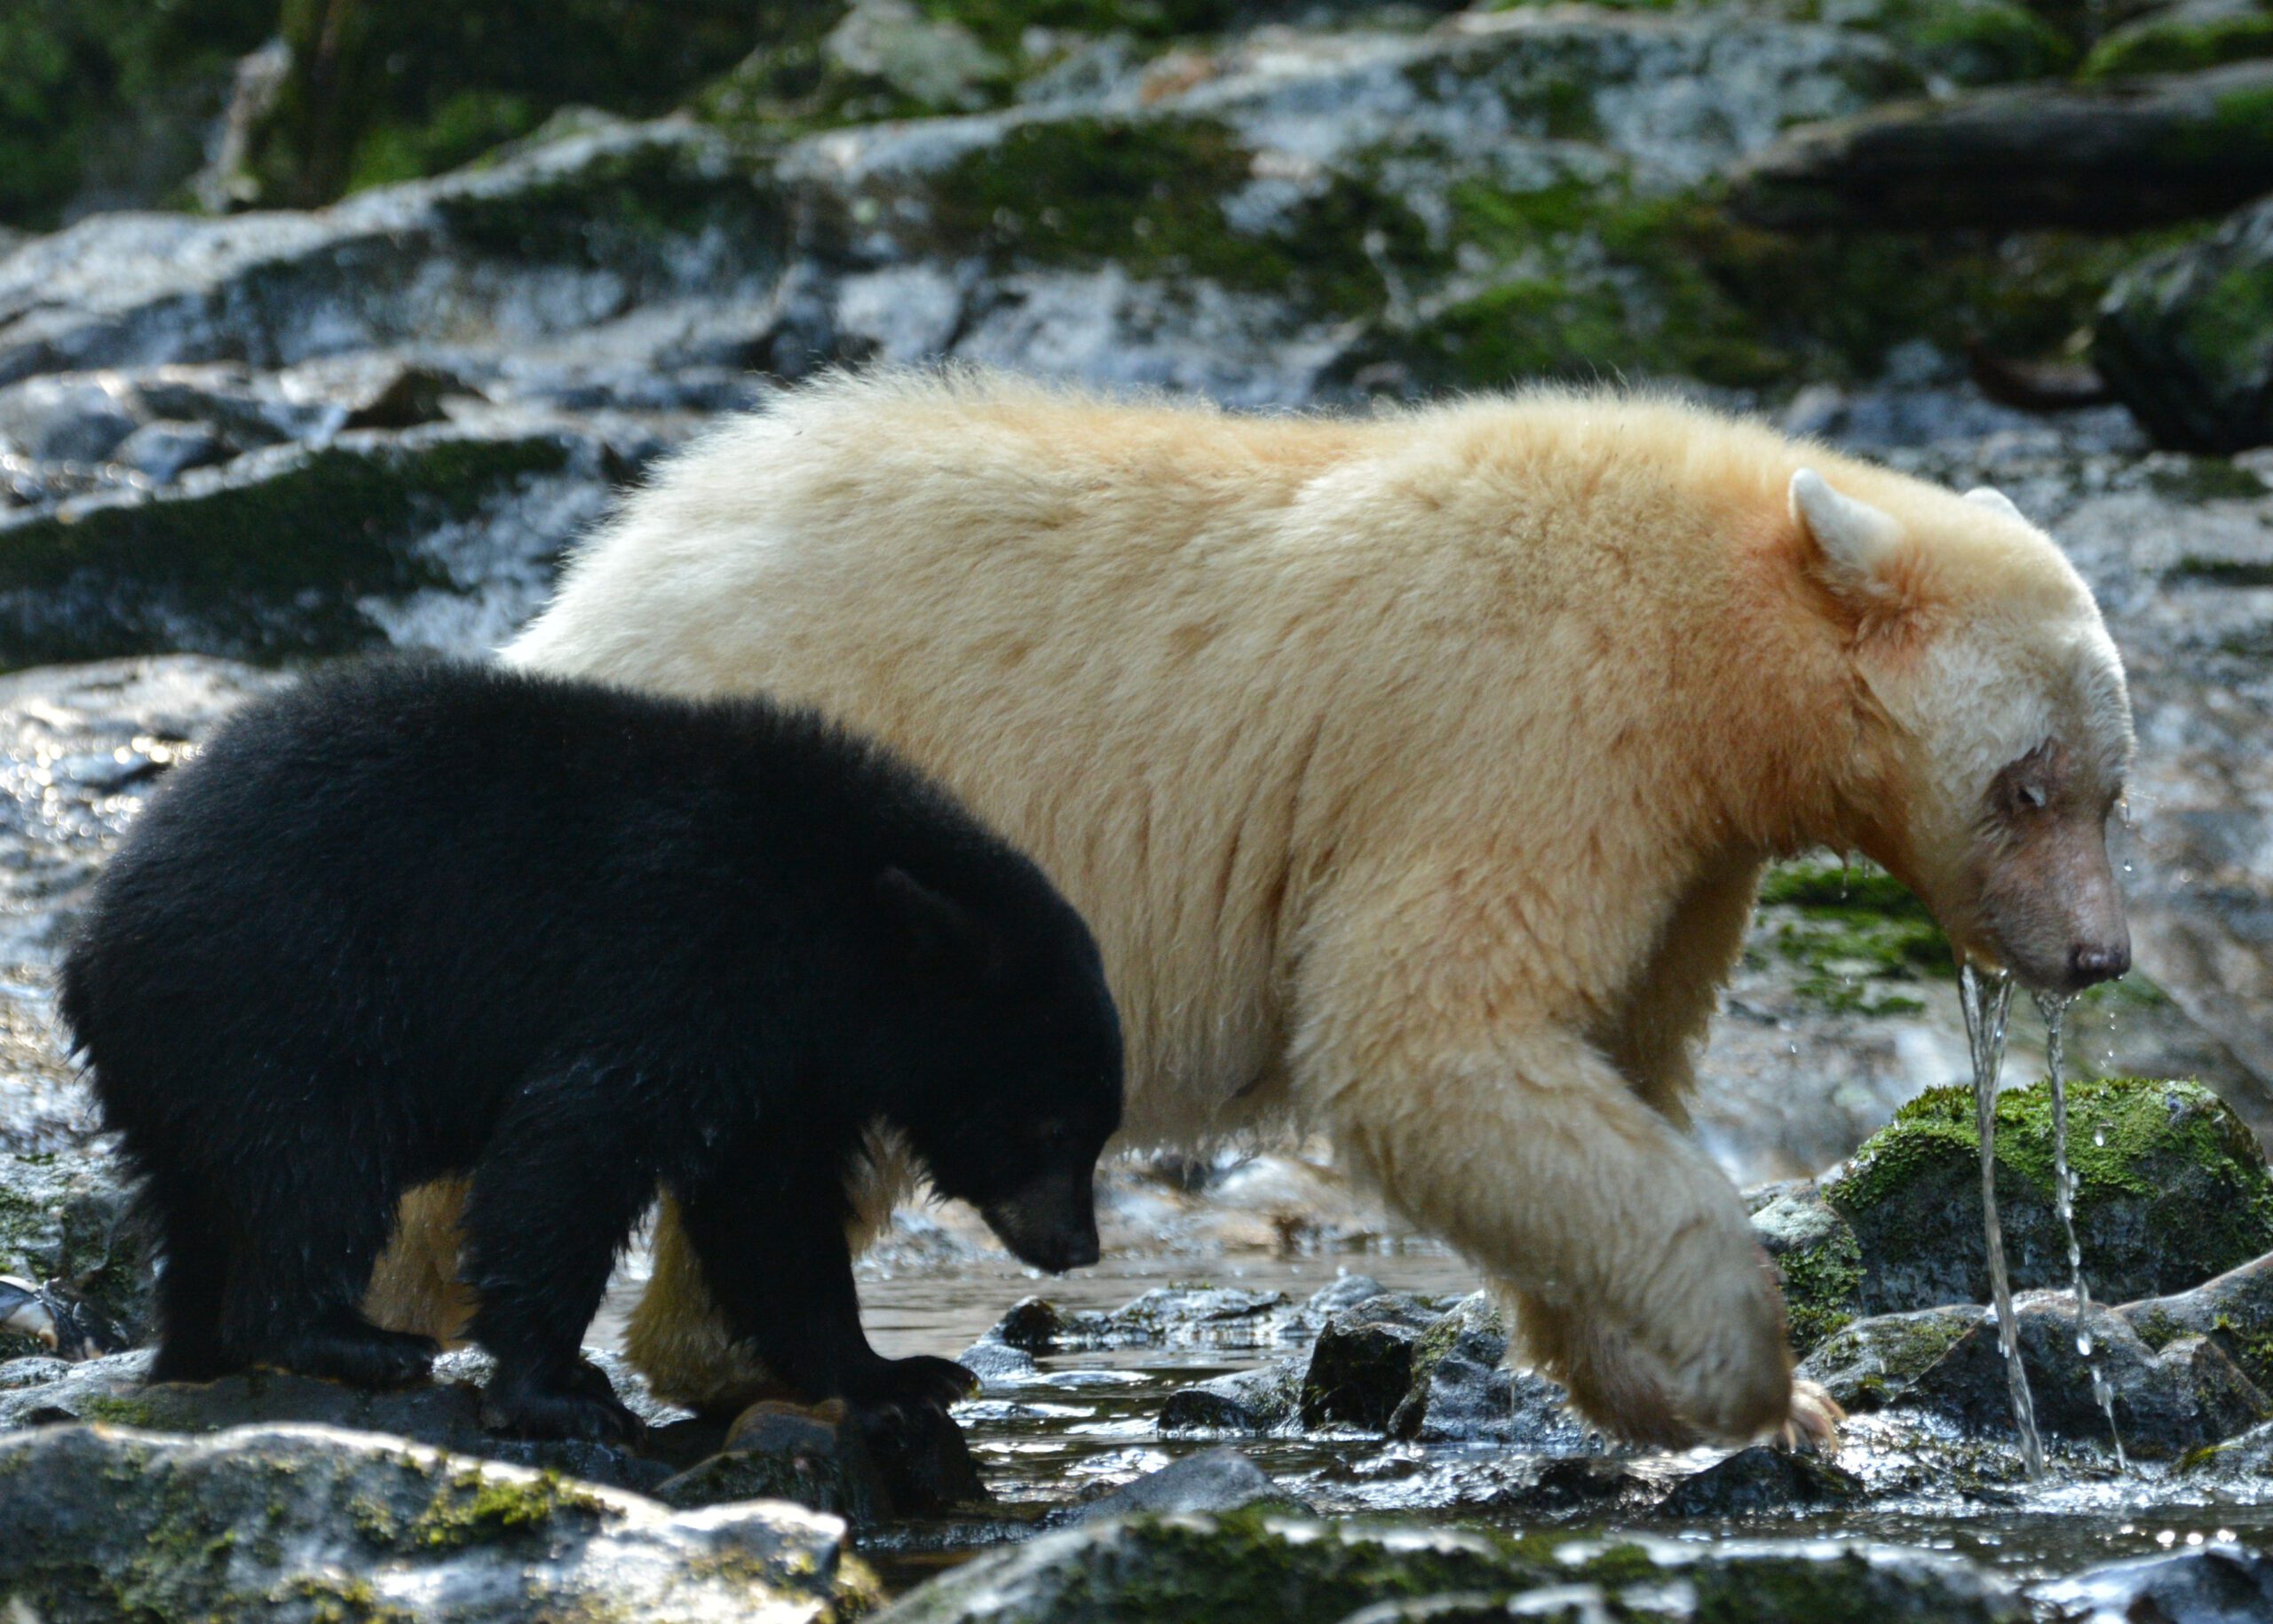 Photo: Simon Ager. Did you know, not every spirit bear carries the white-furred gene?